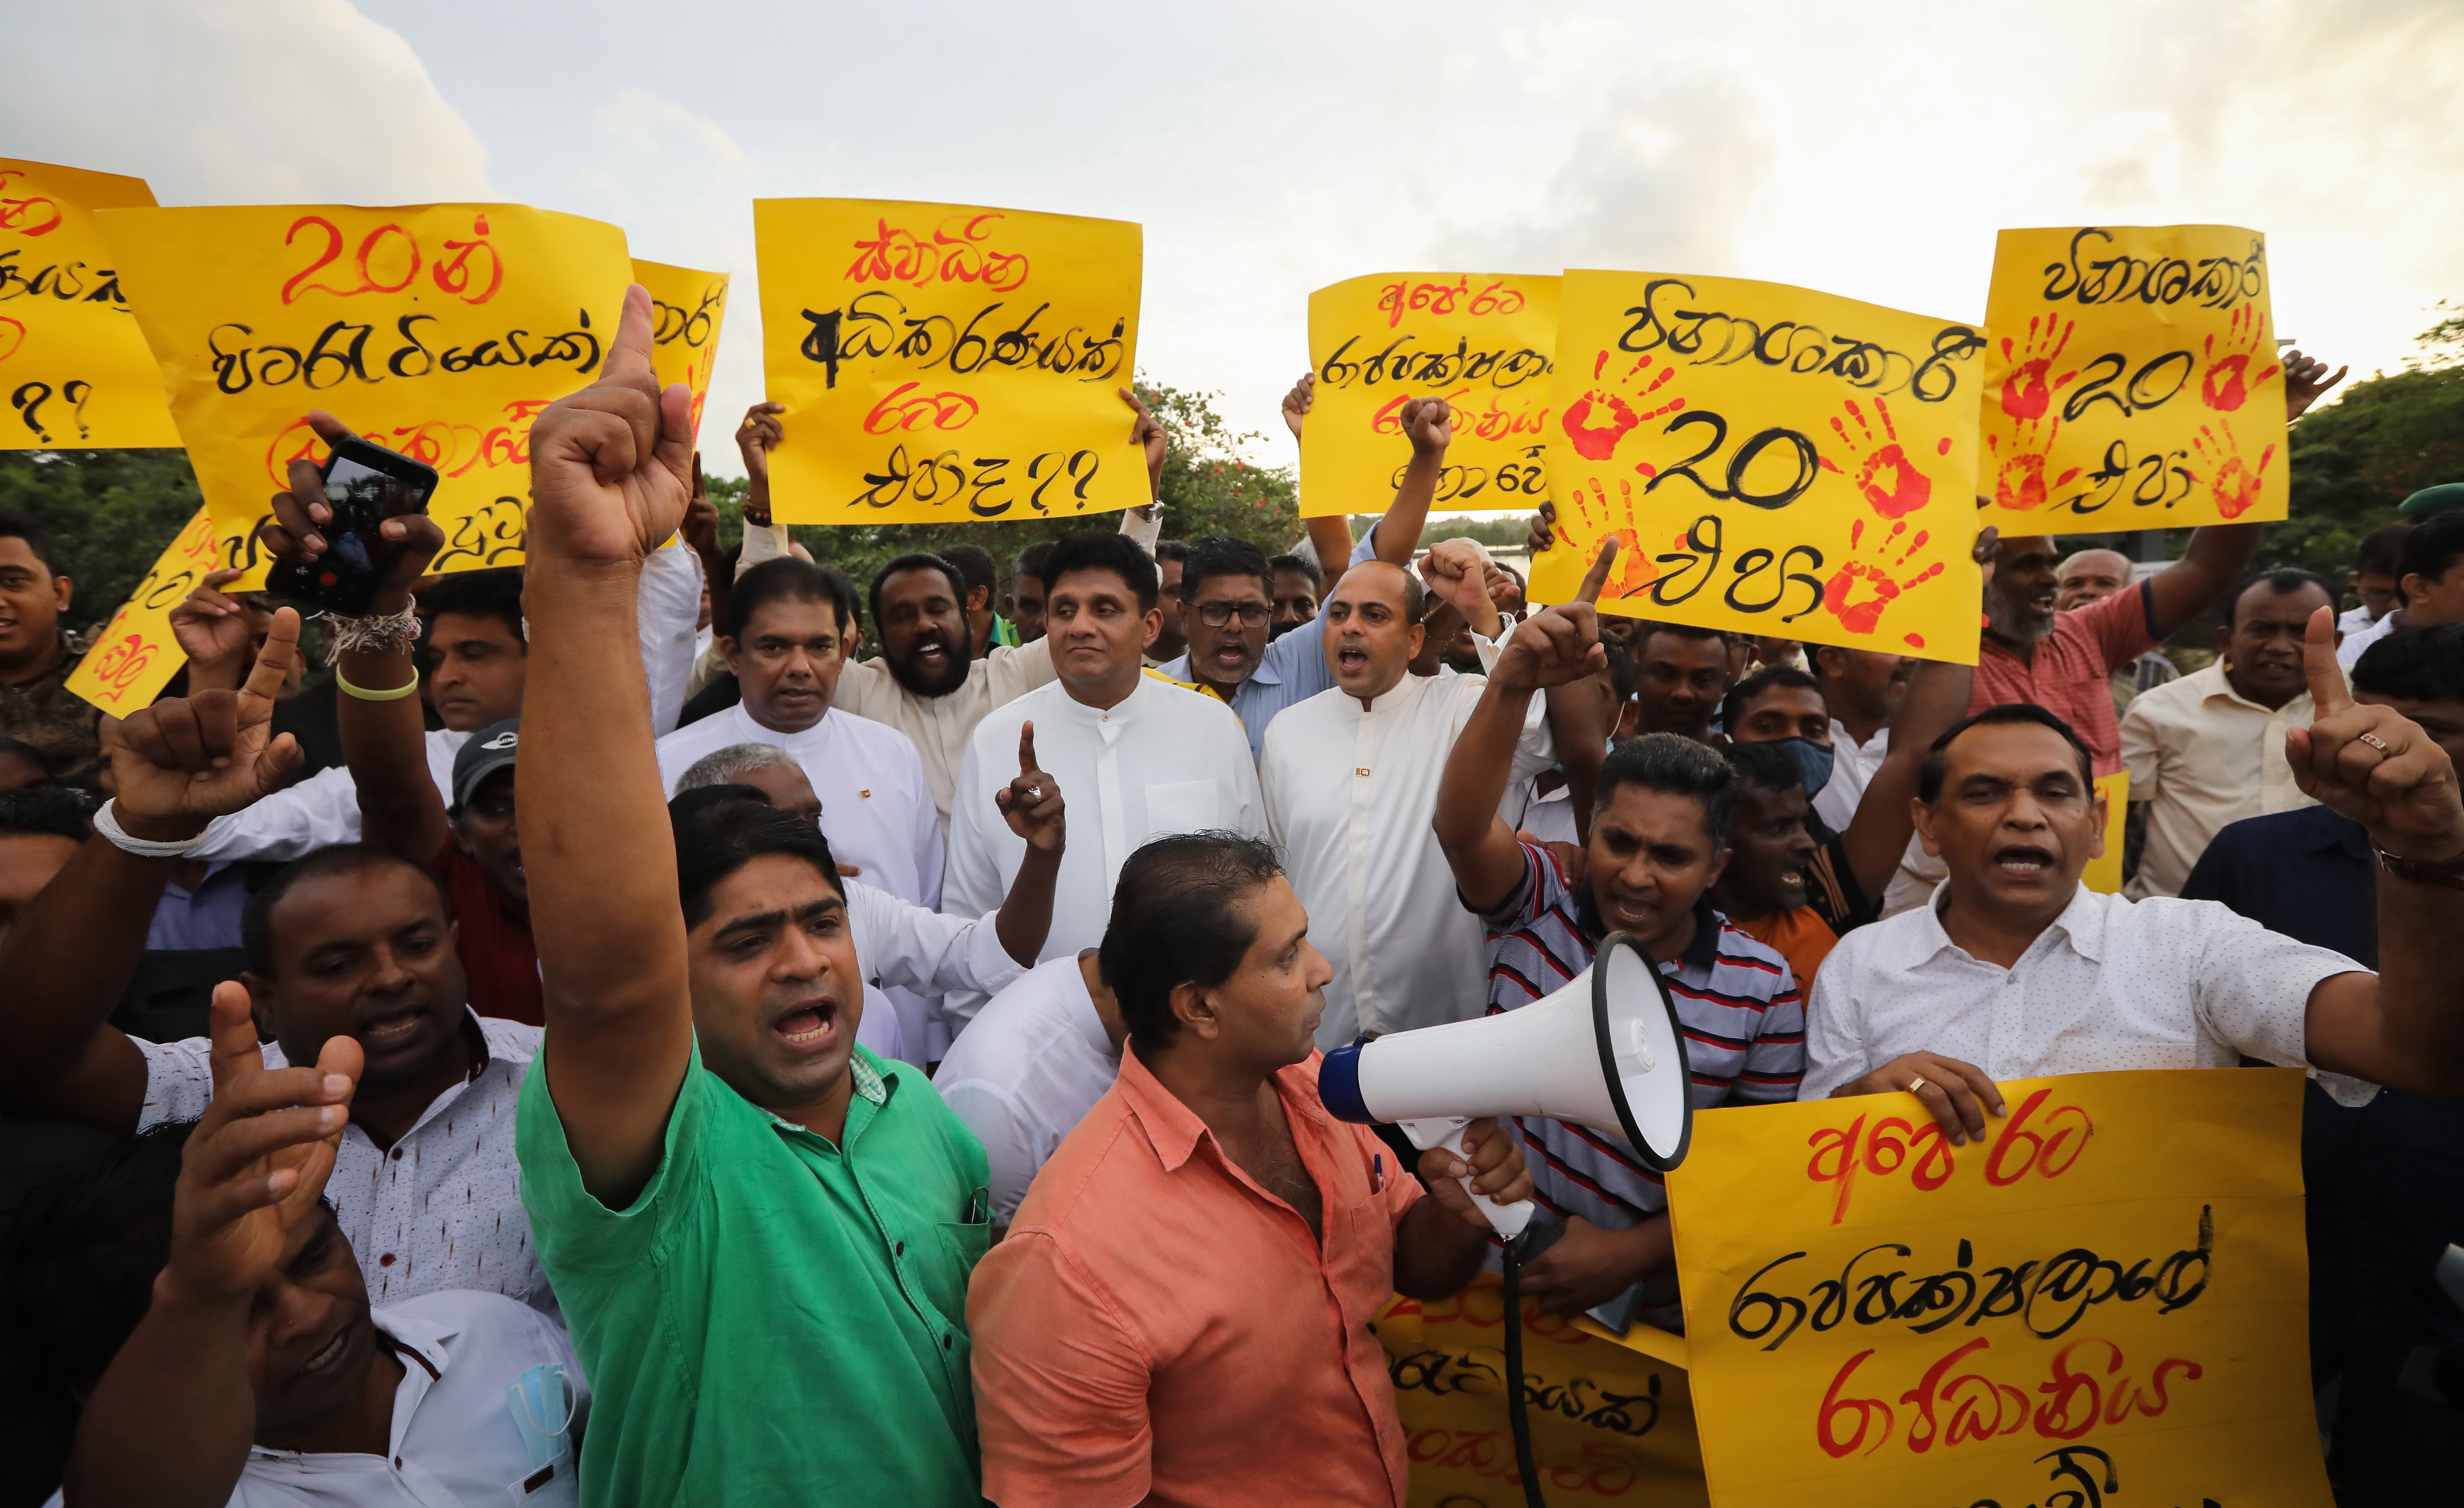 Sri Lankans protest against proposed constitutional amendments they fear will give the president unlimited powers